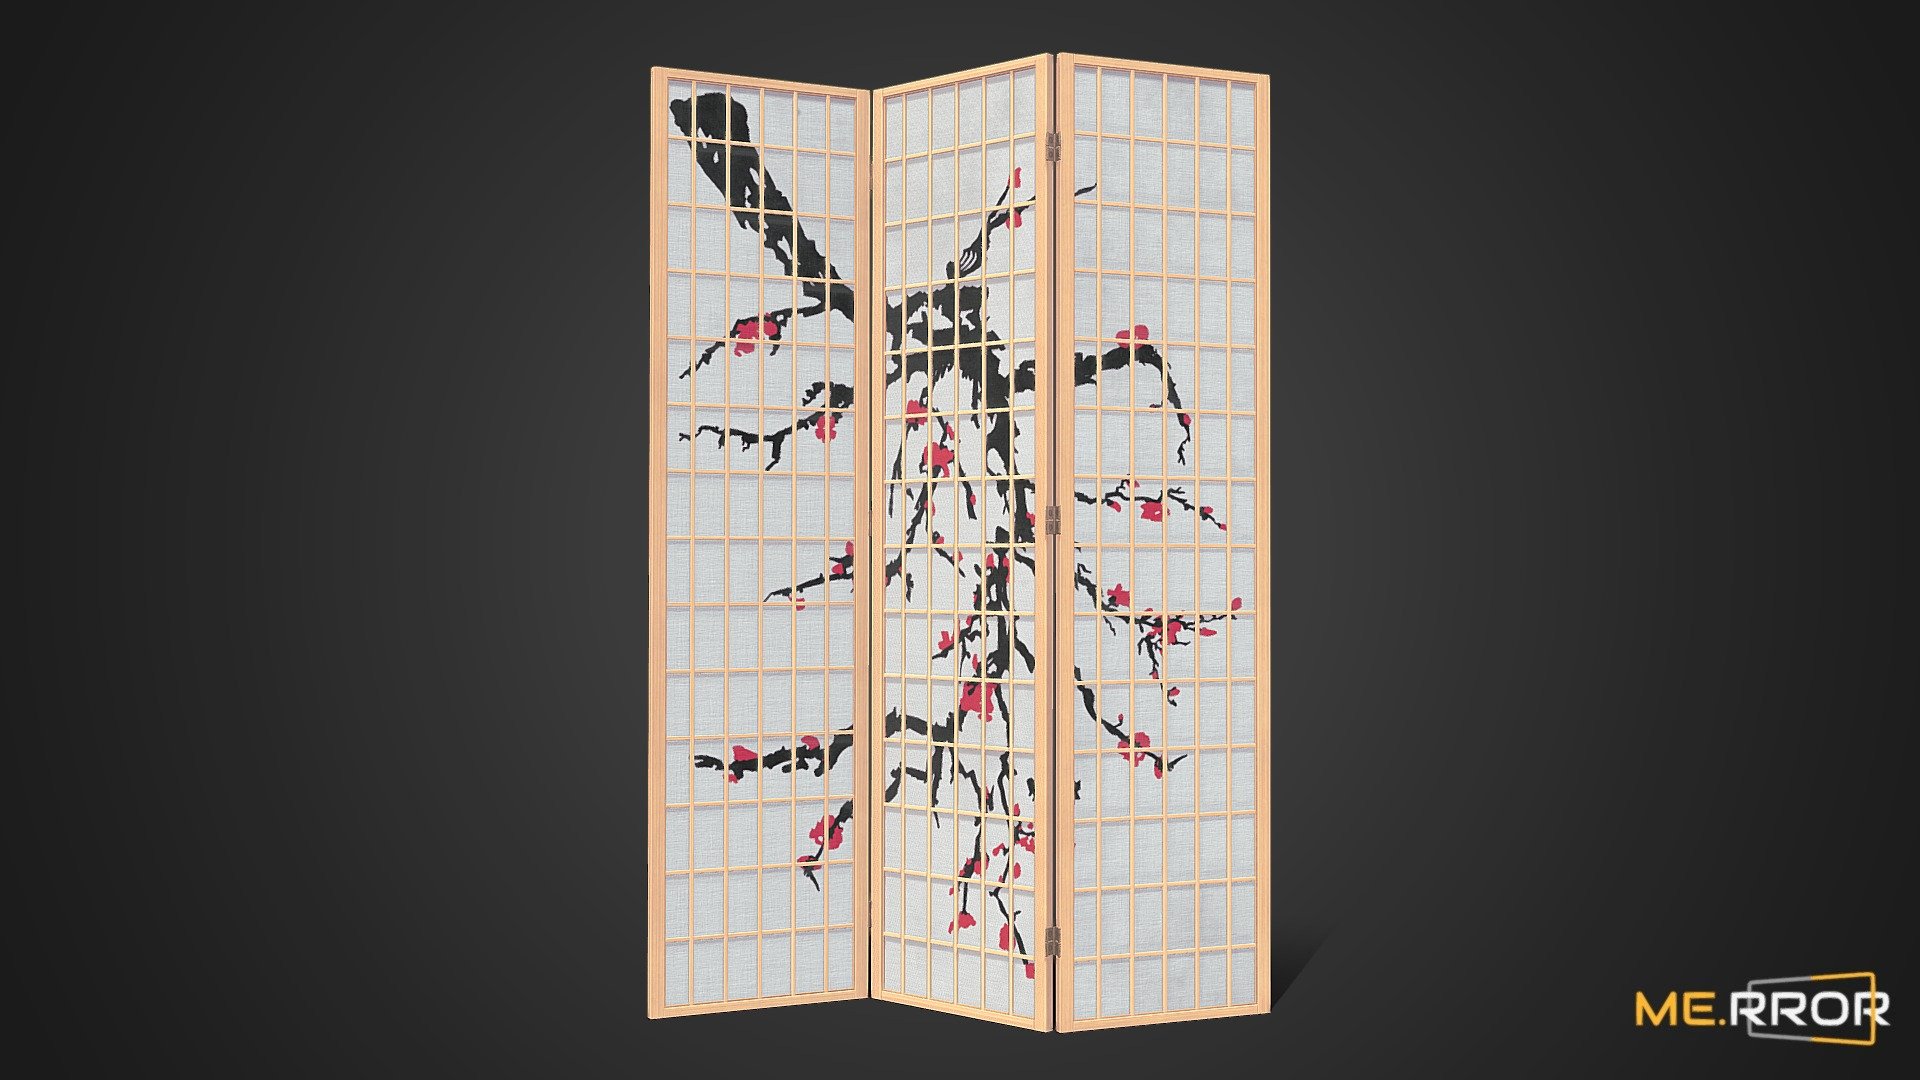 MERROR is a 3D Content PLATFORM which introduces various Asian assets to the 3D world


3DScanning #Photogrametry #ME.RROR - [Game-Ready] Japanese Folding Screen - Buy Royalty Free 3D model by ME.RROR Studio (@merror) 3d model